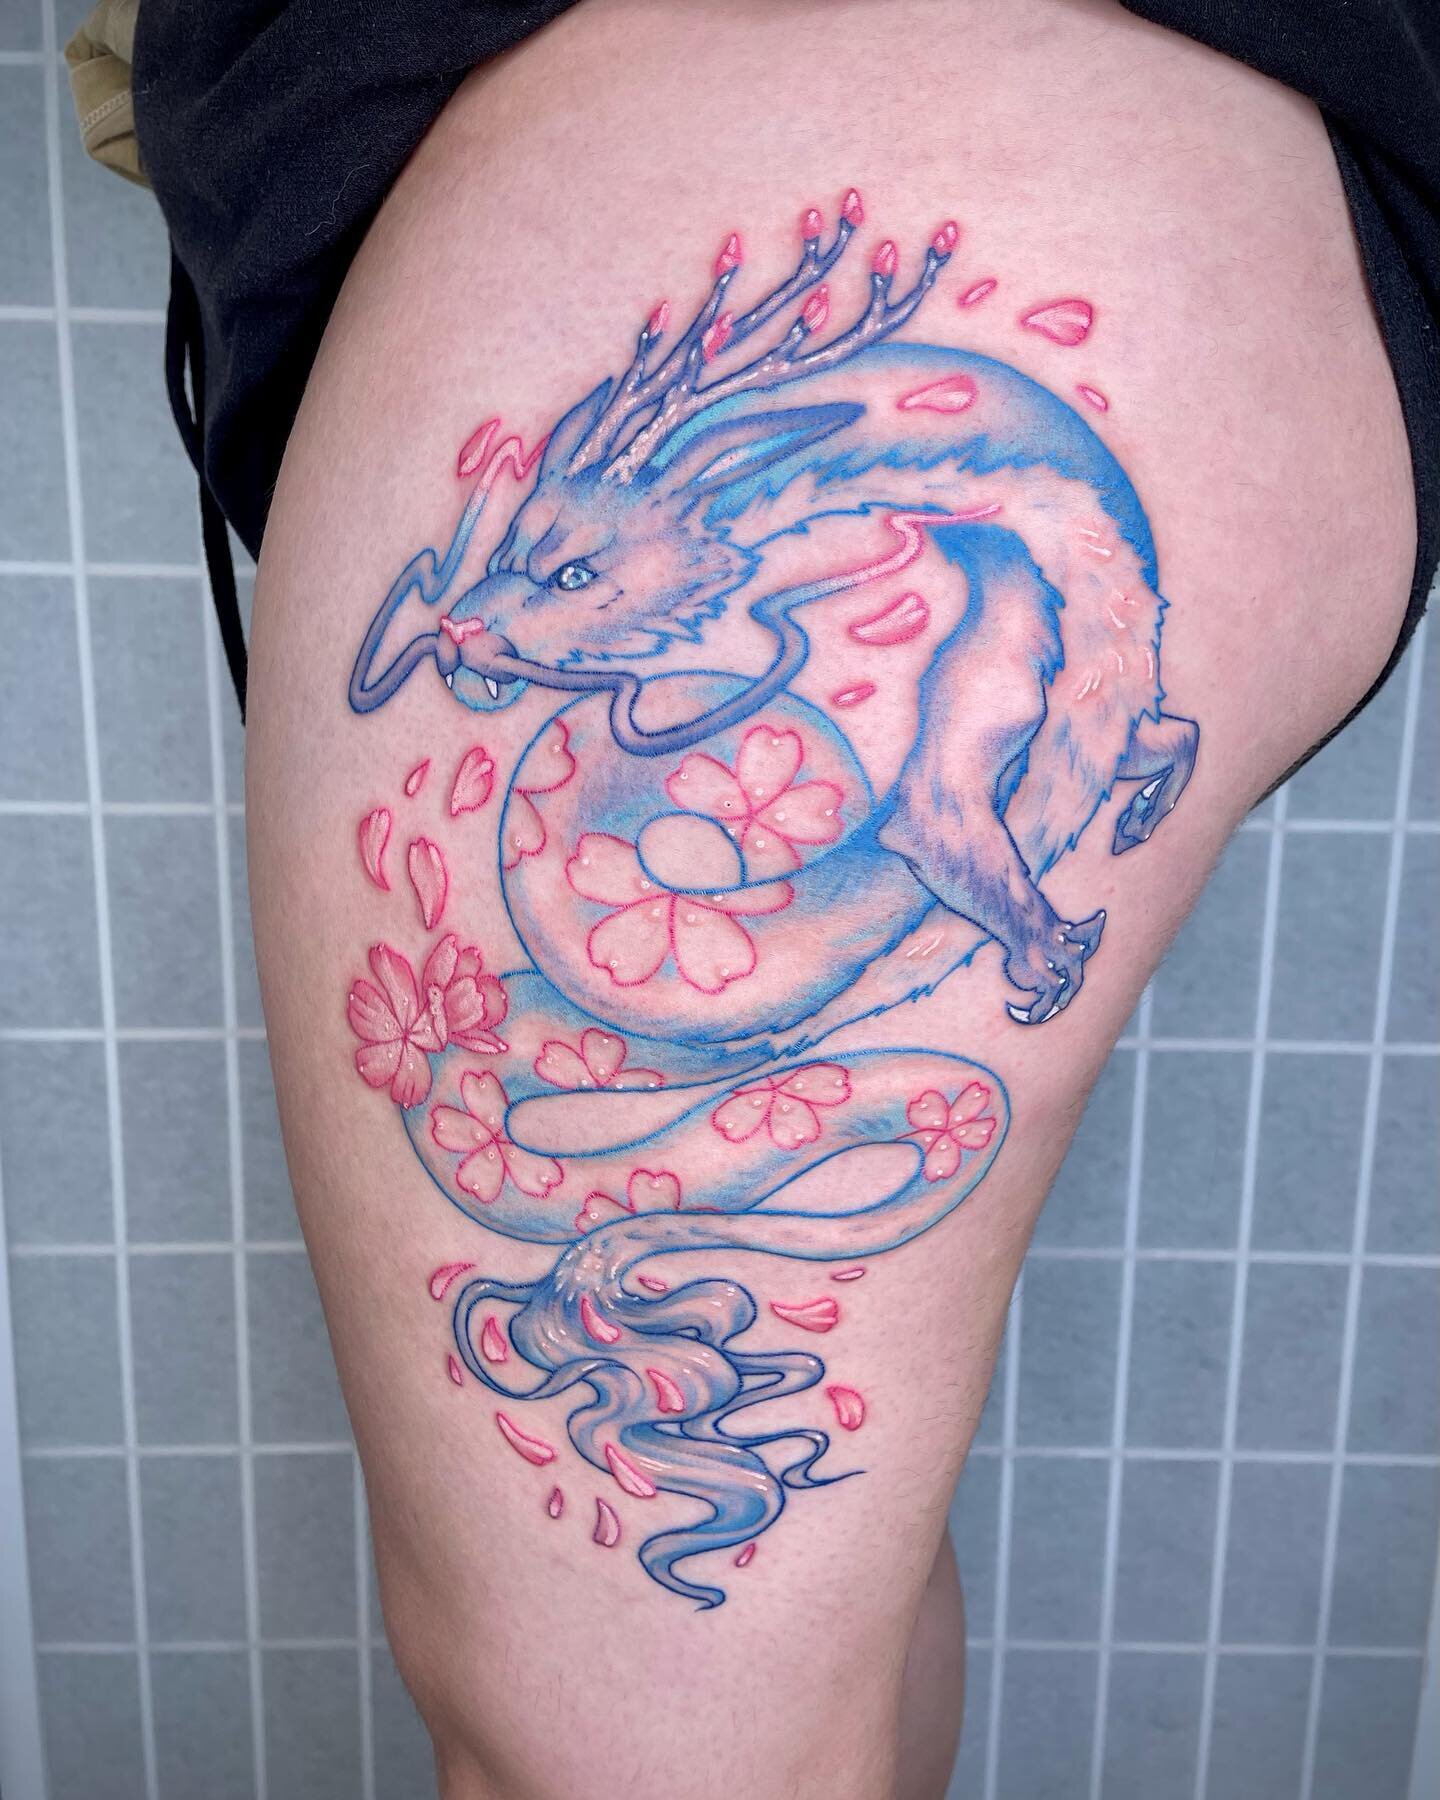 Dragon 💙🐉🌸 For Emma

Thank you for your trust through this process! So glad we met how we did and got to make an awesome piece together! 💗 Grateful for you! 

#pdxtattoo #portlandtattoo #bluedragontattoo #hakutattoo #colortattoo #tattoo #dragonta